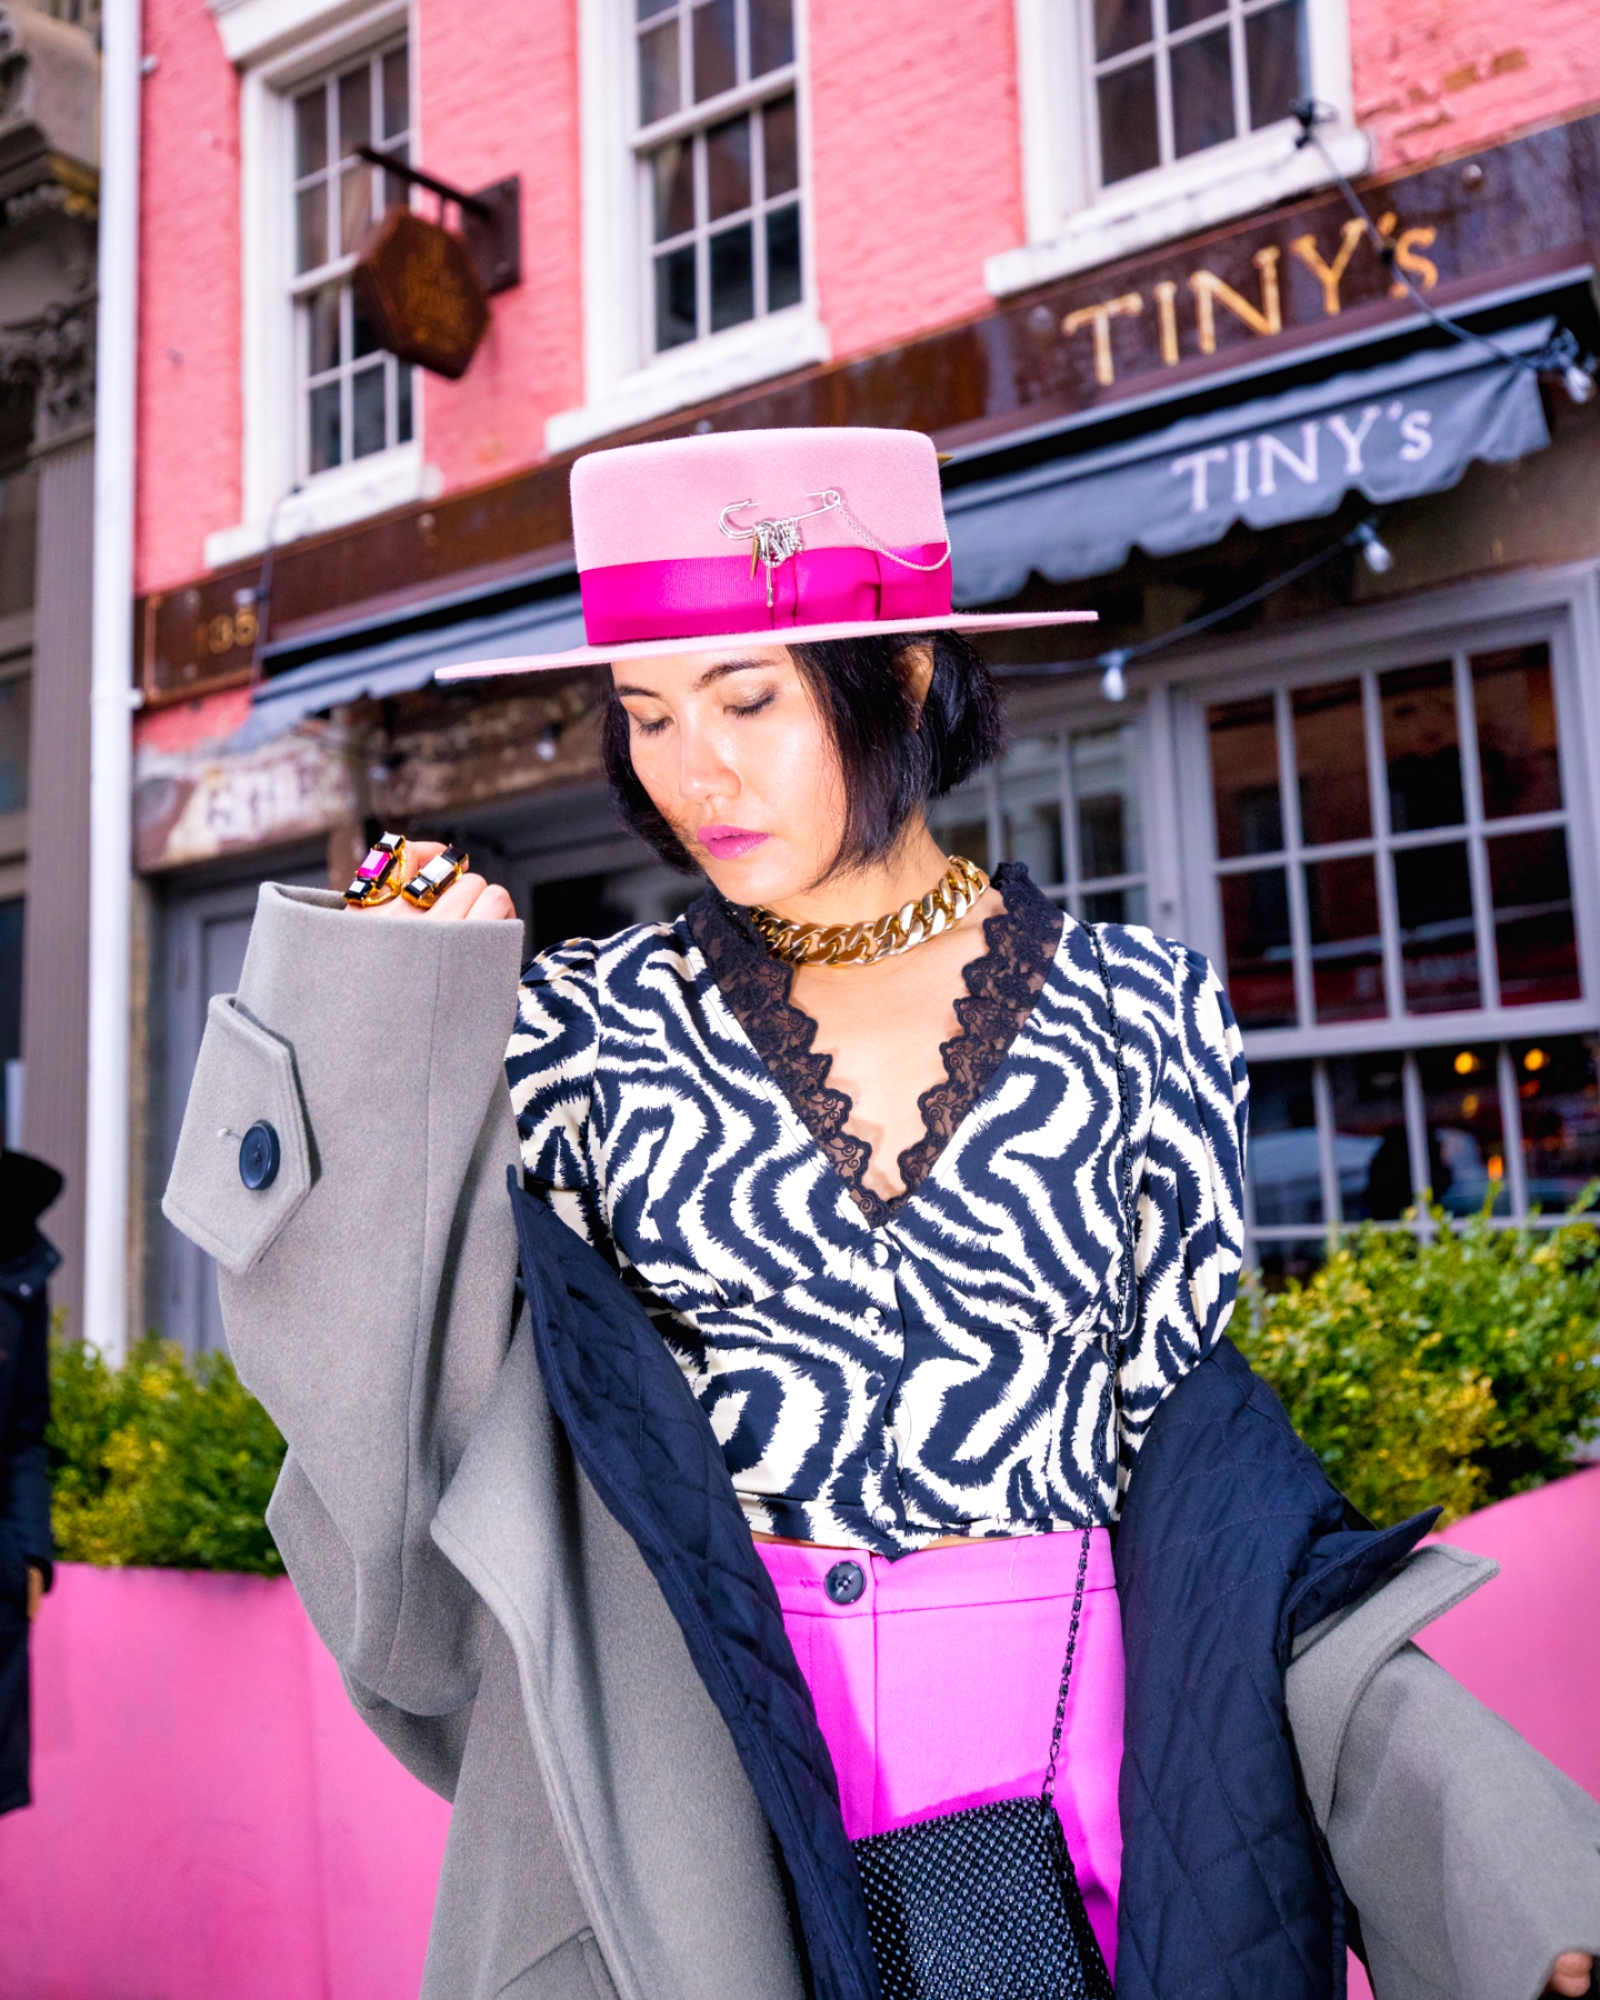 nanphanita jacob is wearing a pink cordobés hat by gladys tamez millinery for valentines day outfit idea in tribeca nyc